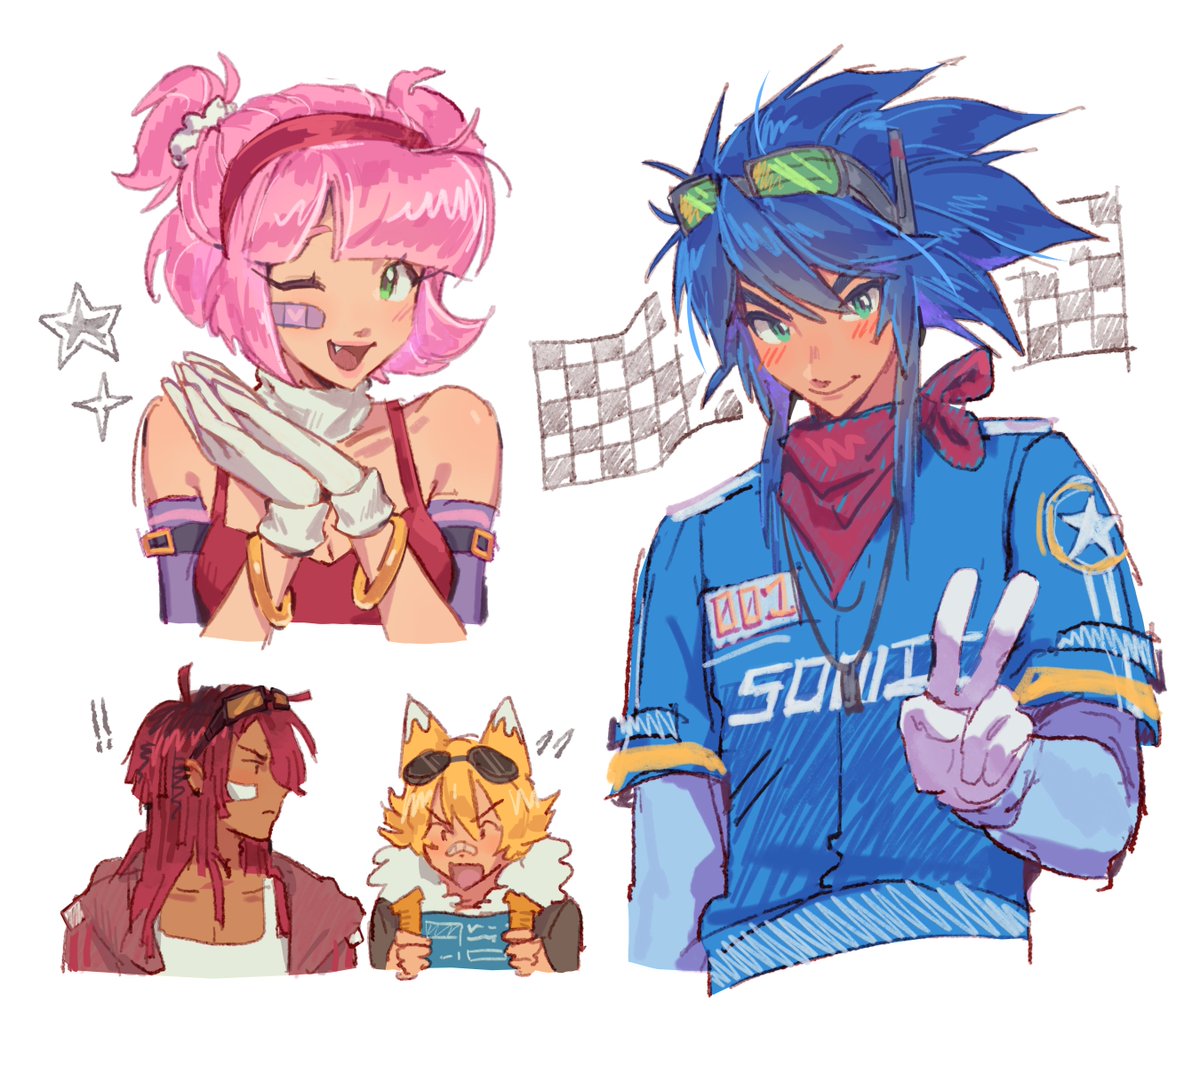 didn't want to forget how to draw humans so have sonic team gijinkas lol

#SonicTheHedgehog #amyrose #knuckles #tailsthefox